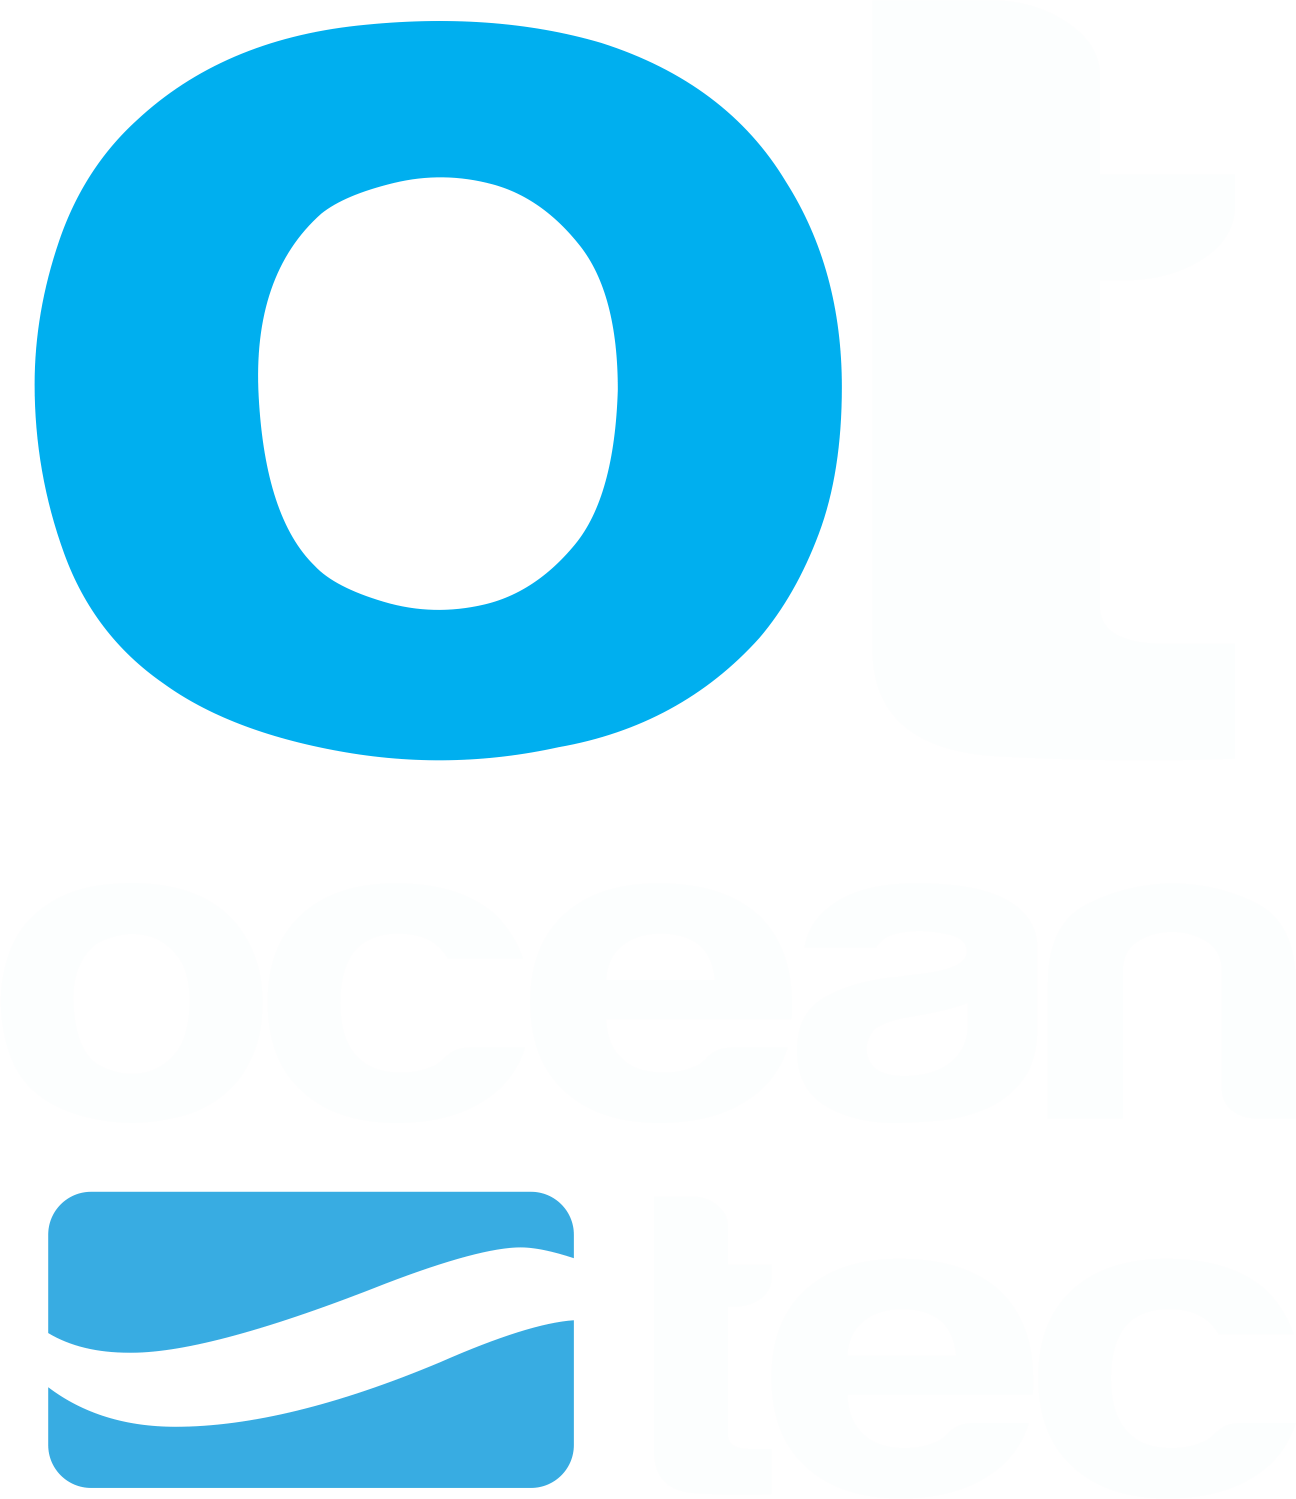 Ocean Tec | Wetsuits and Rashguards Made in the USA